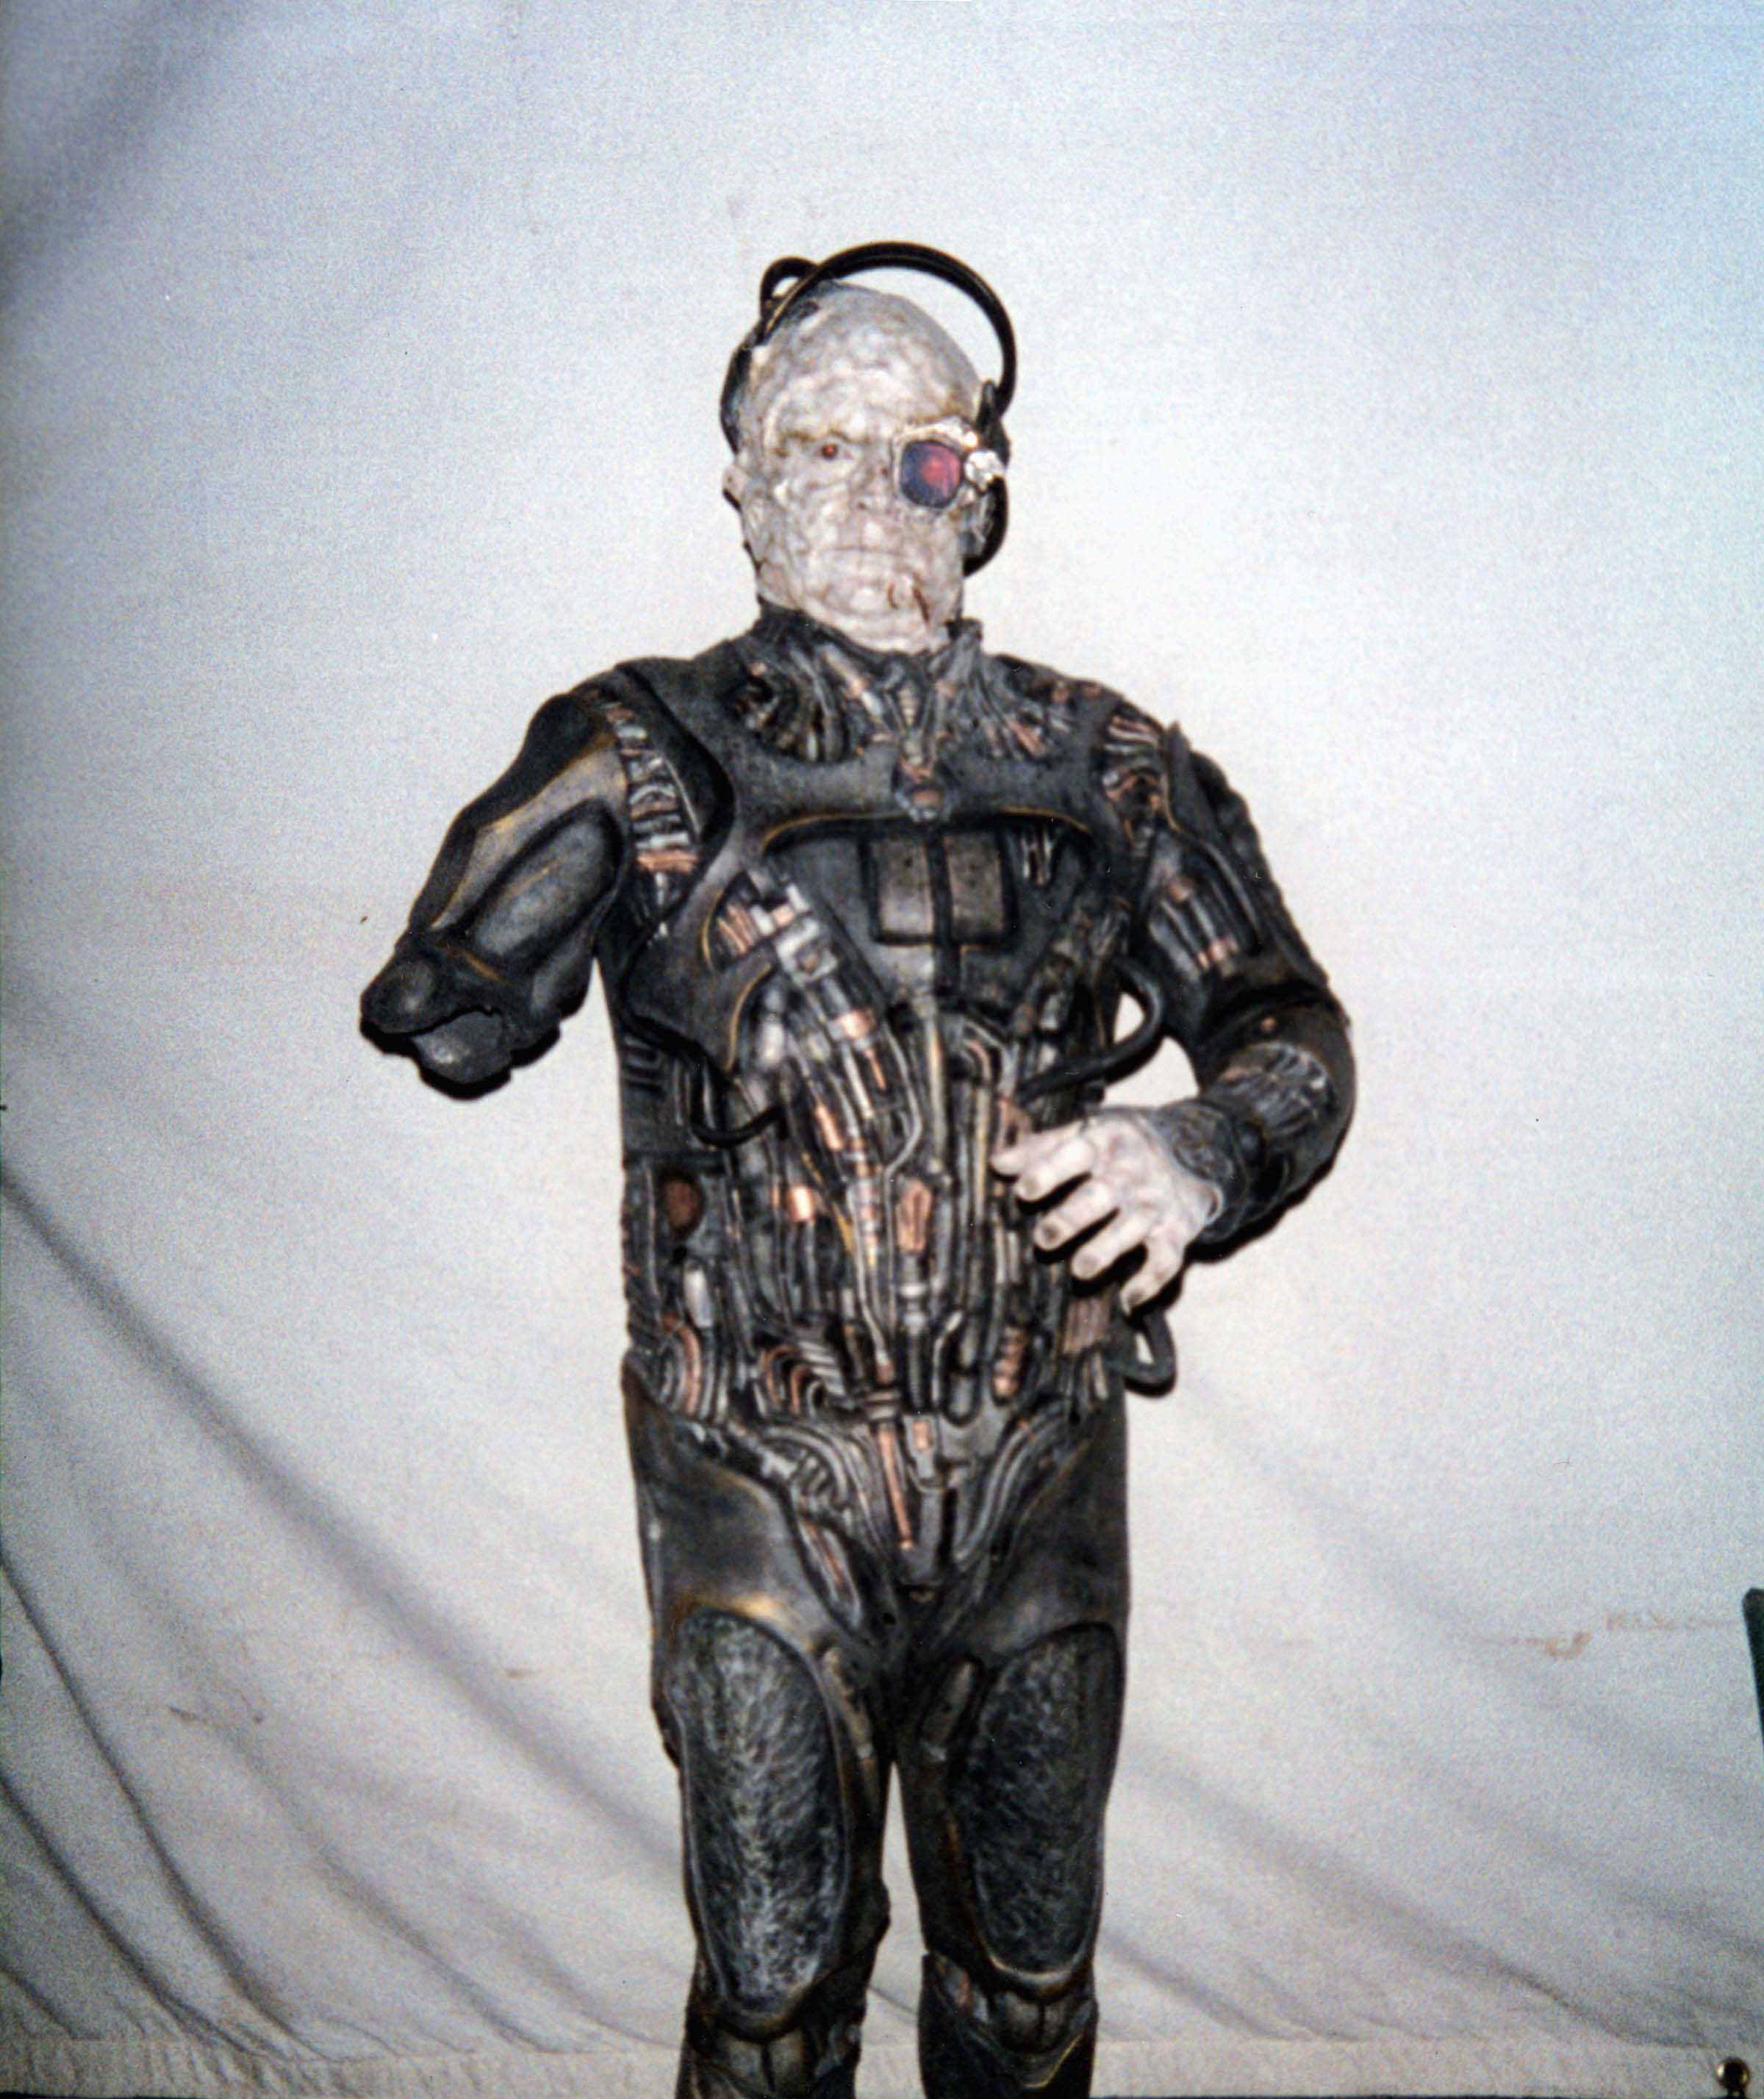 Borg, Star Trek Voyager Series, 1st use of Borg costume from the movie in the Voyager T.V. series.